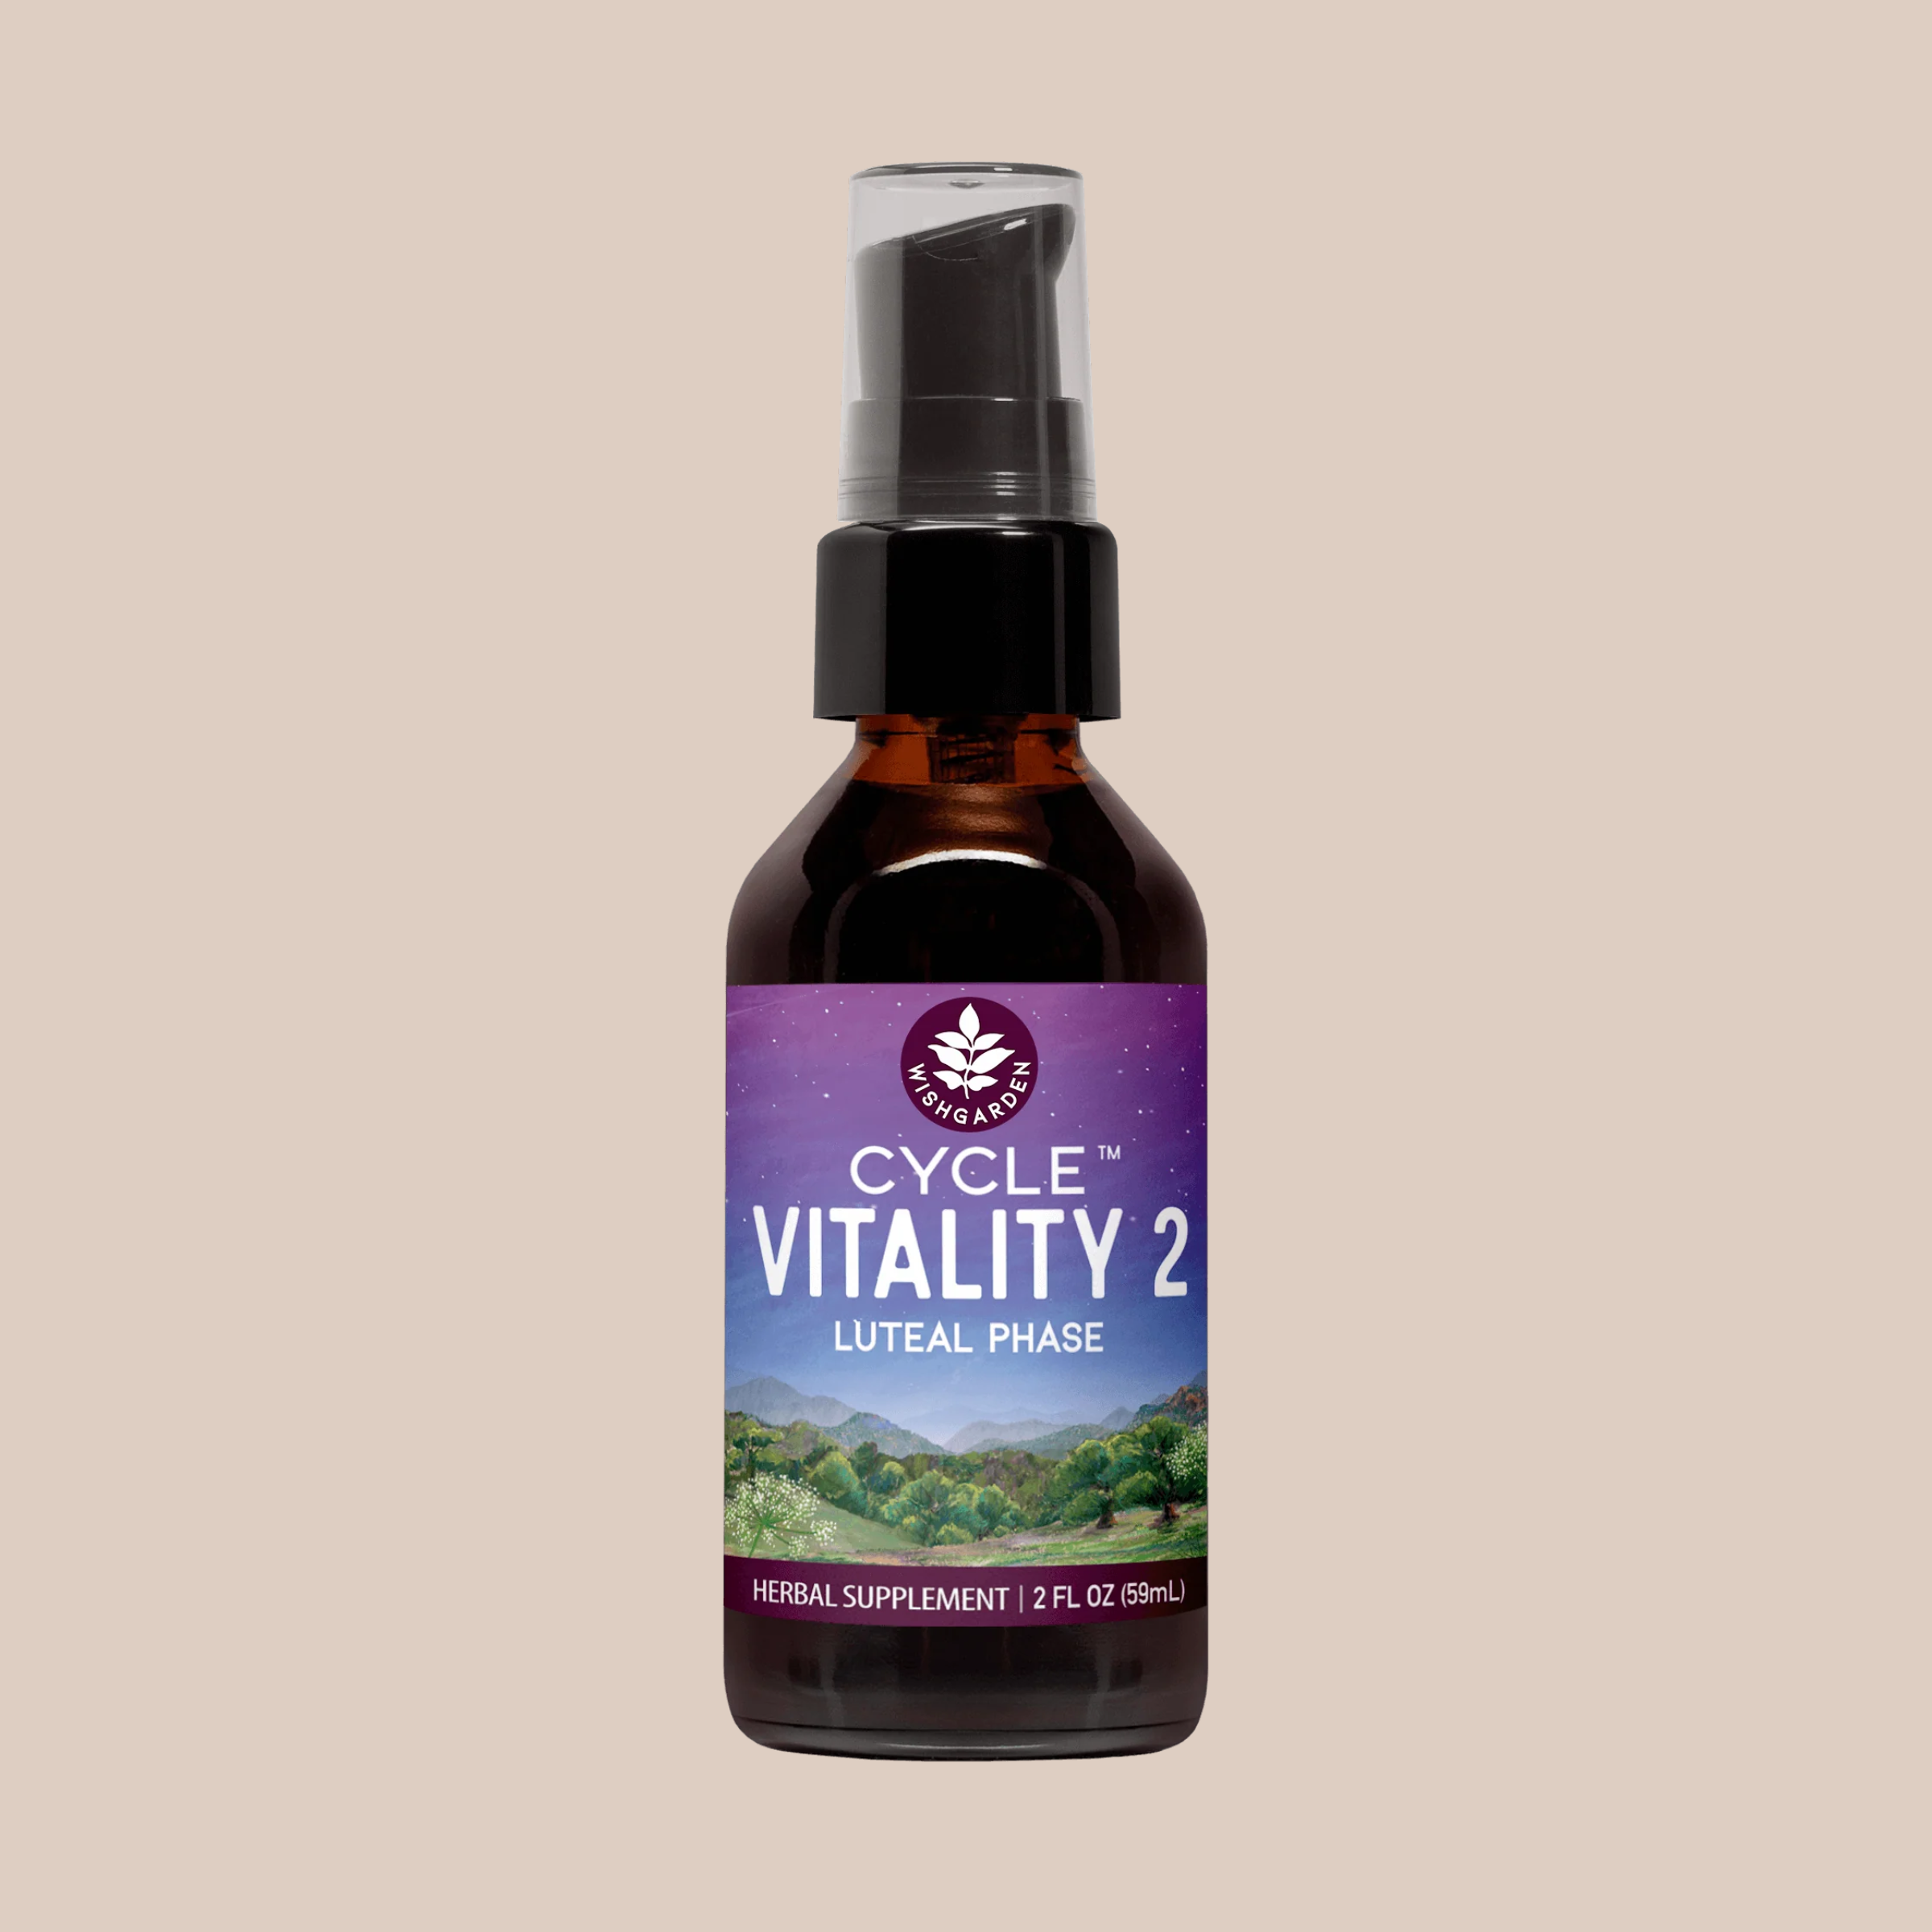 CYCLE VITALITY 2 LUTEAL PHASE - PROGESTERONE SUPPORT